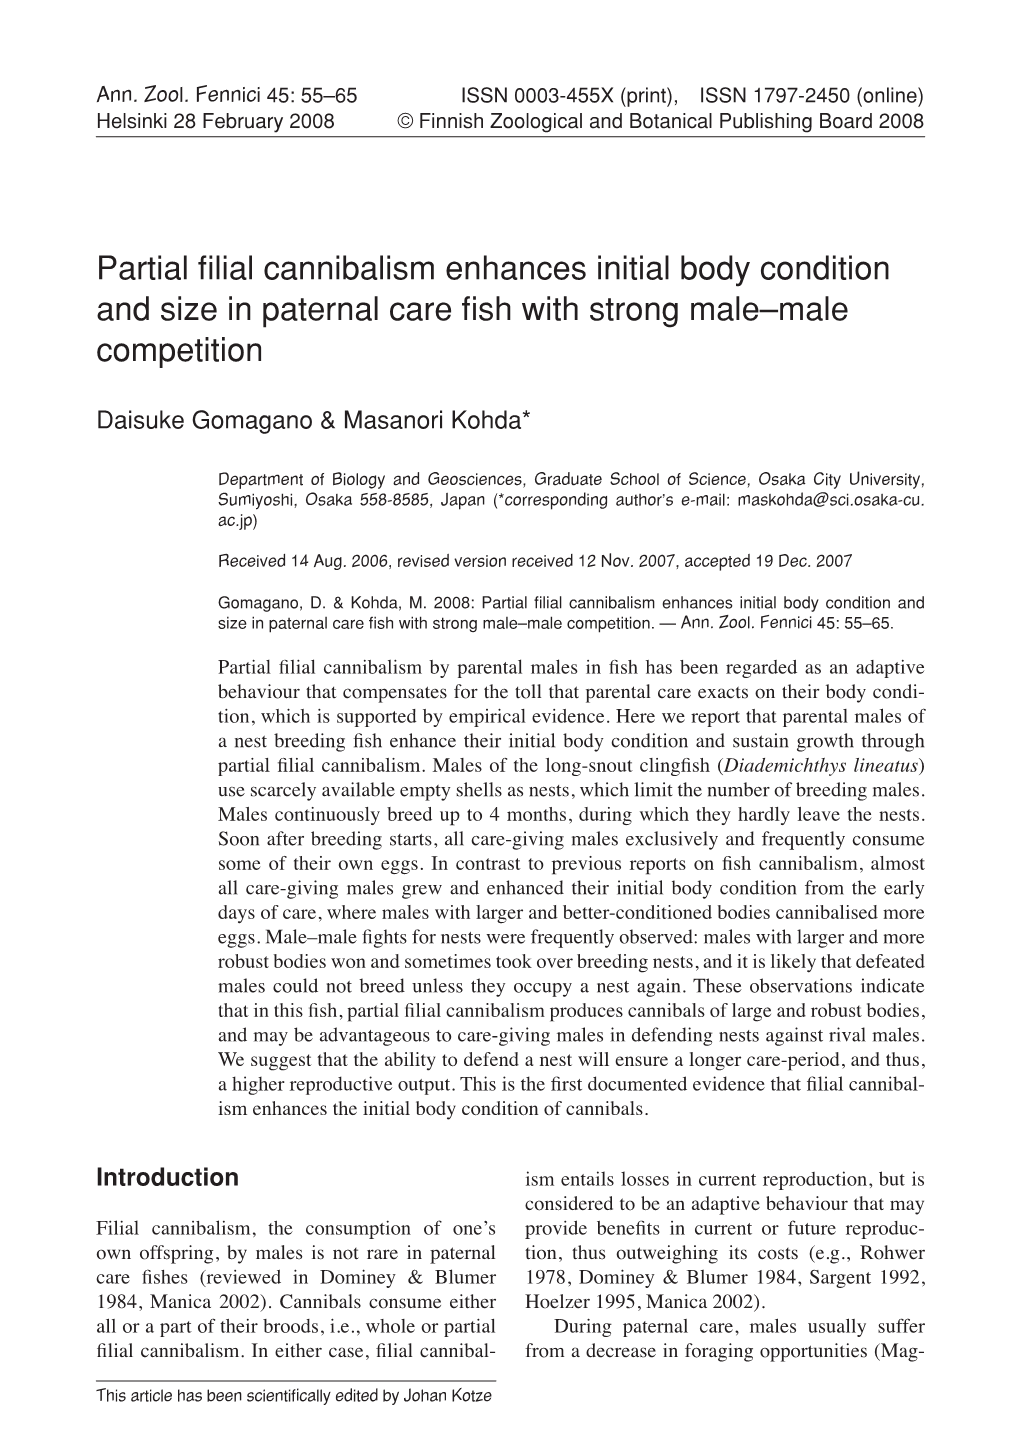 Partial Filial Cannibalism Enhances Initial Body Condition and Size in Paternal Care Fish with Strong Male–Male Competition